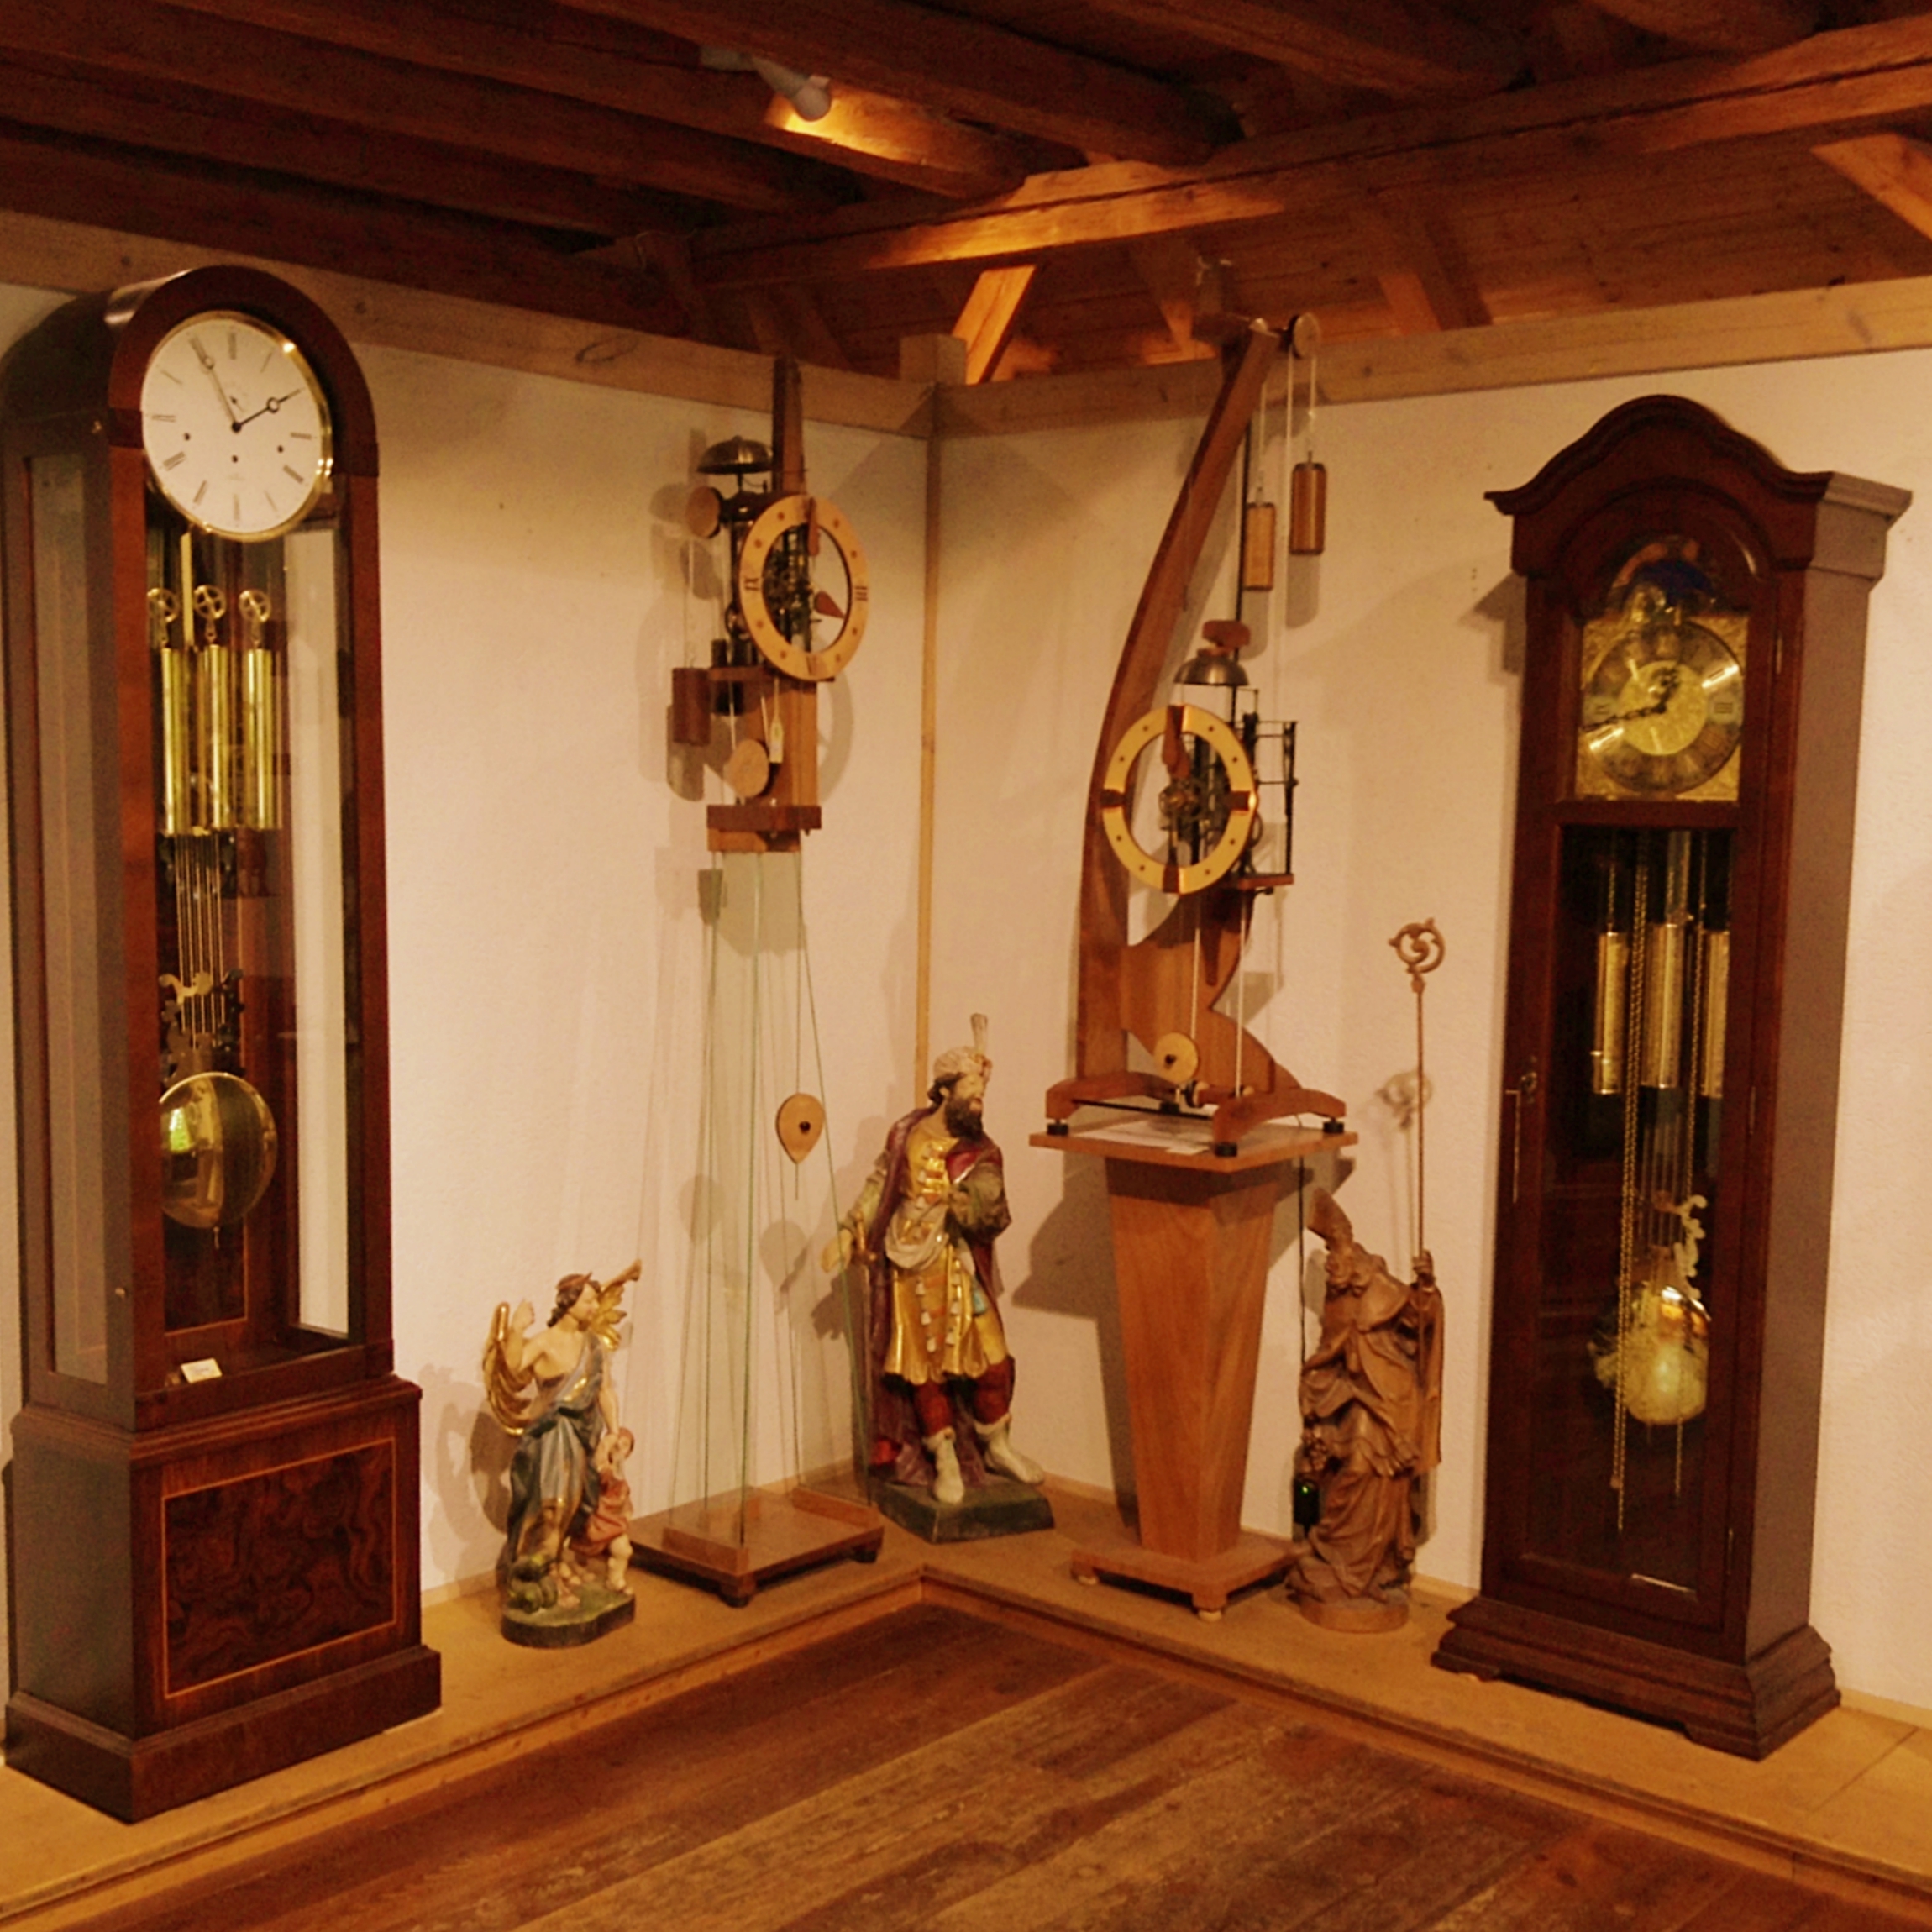 Touring Lake Titisee and Drubba Cuckoo Clock Factory